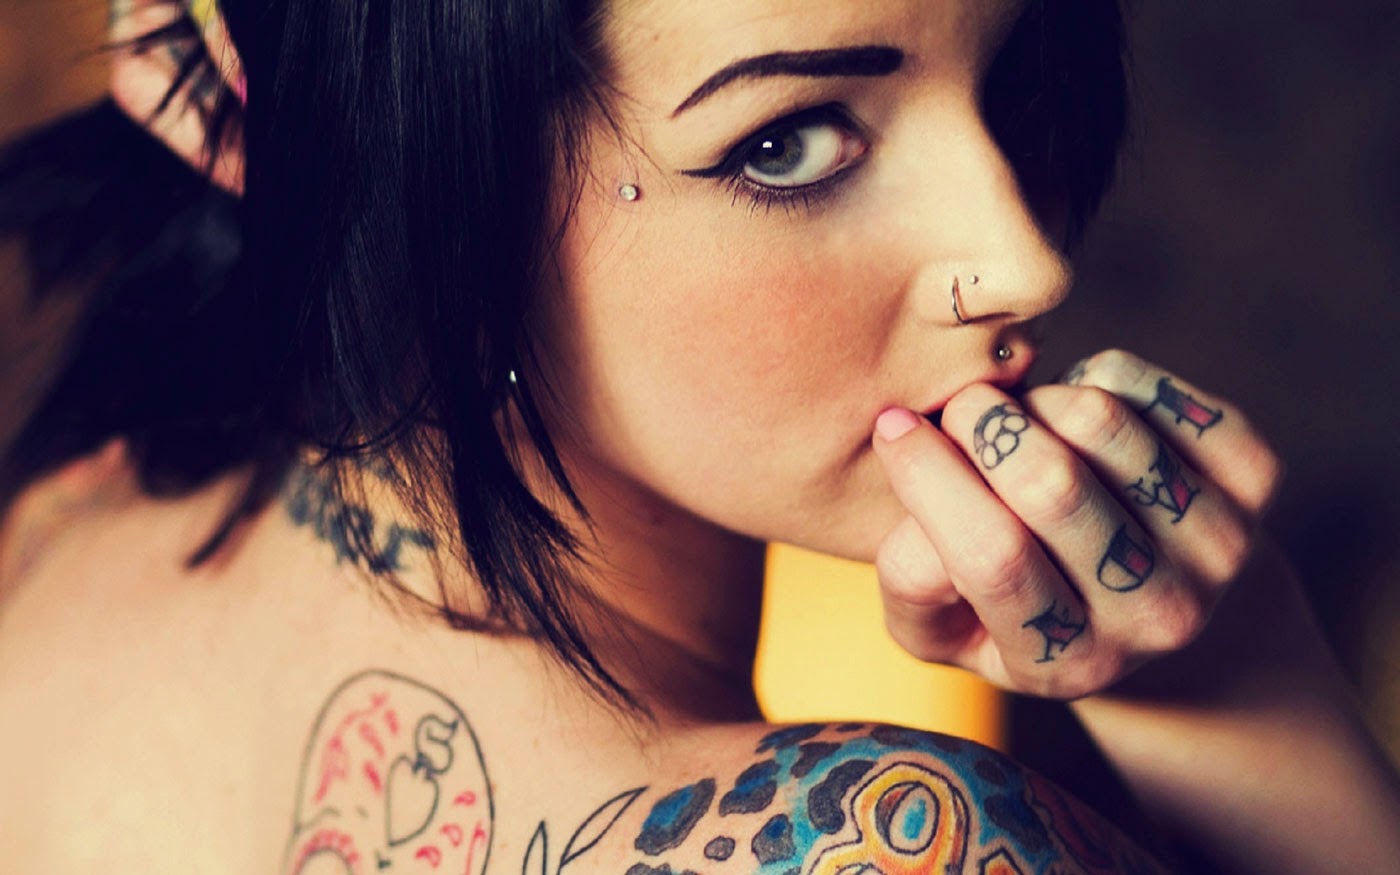 3. "Tattooed beauty with blue hair" - wide 7